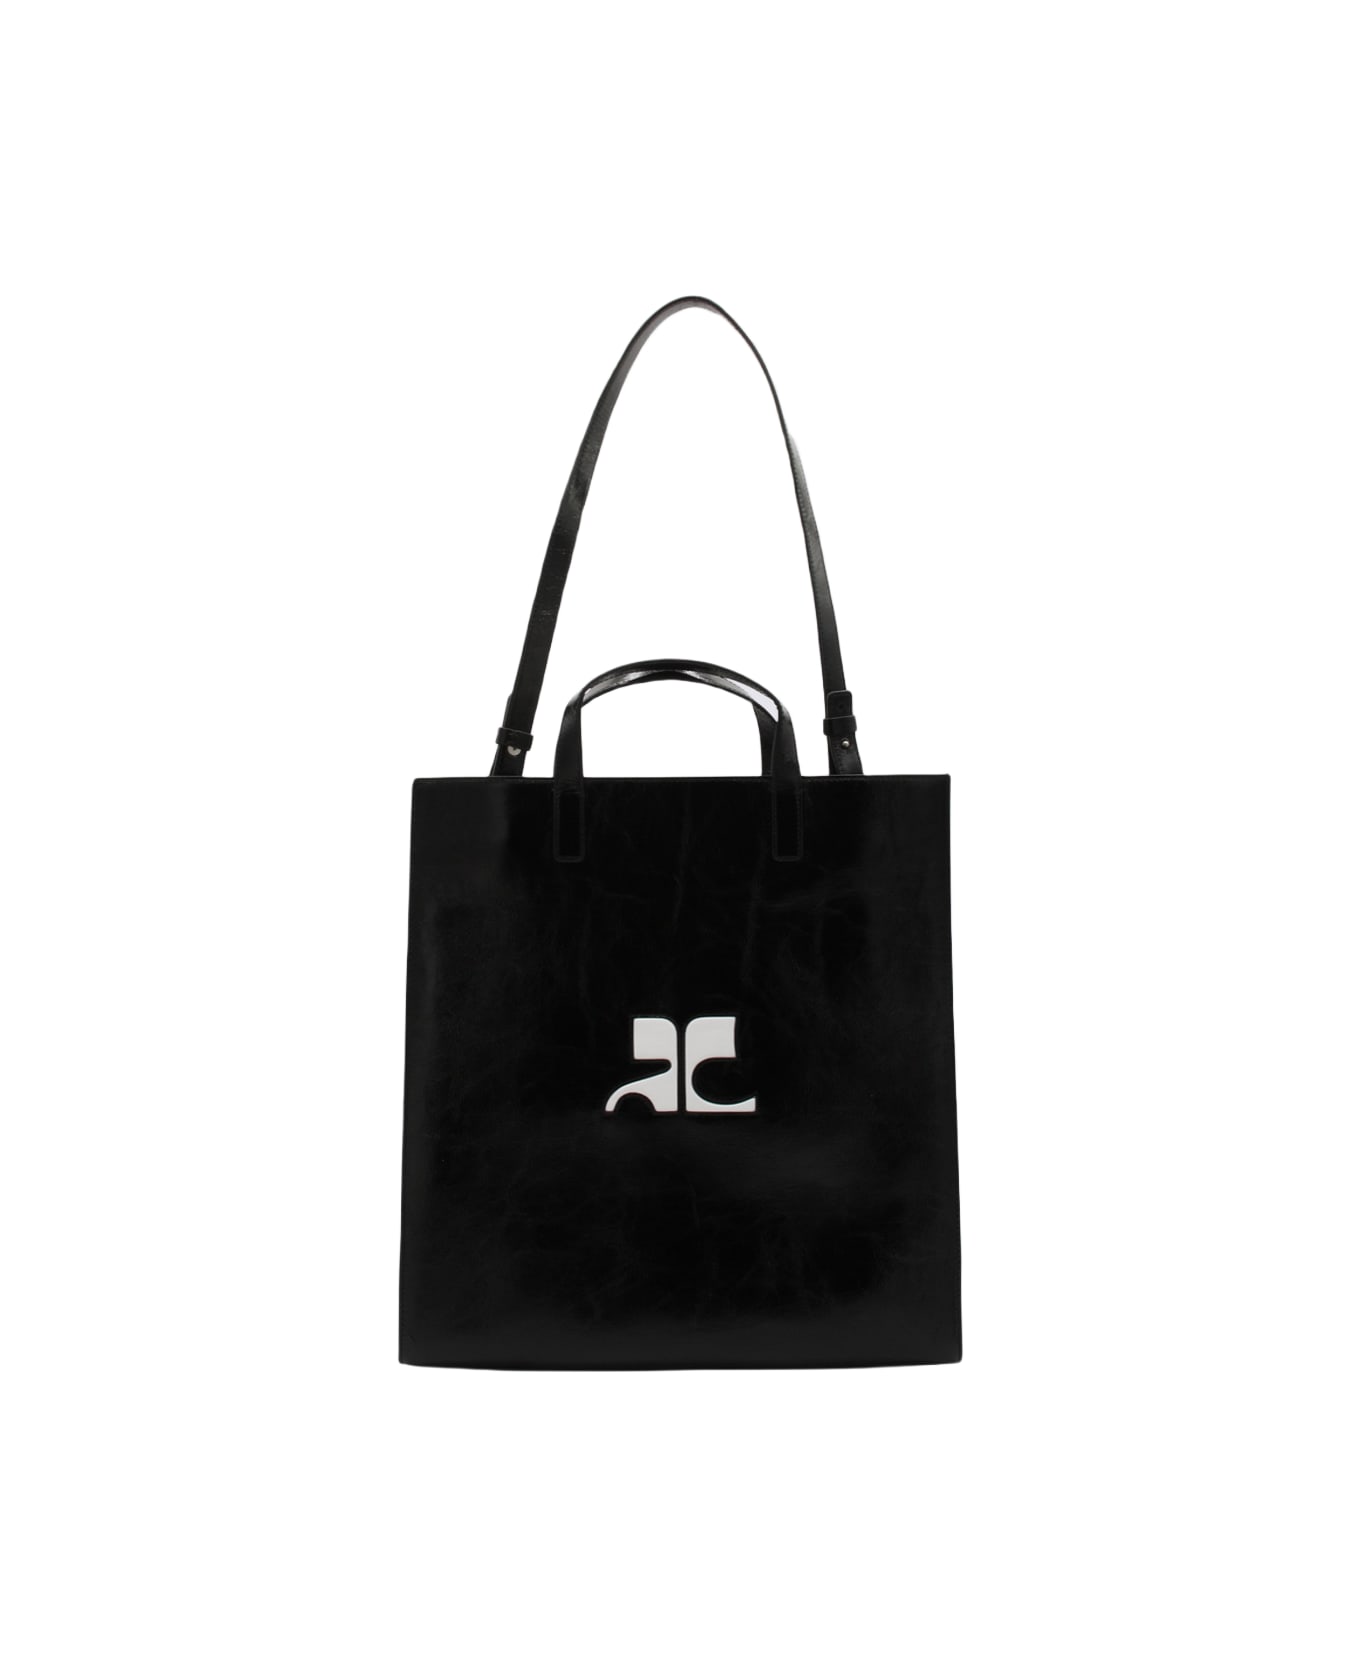 Courrèges Black And White Leather Handle Bag - Black